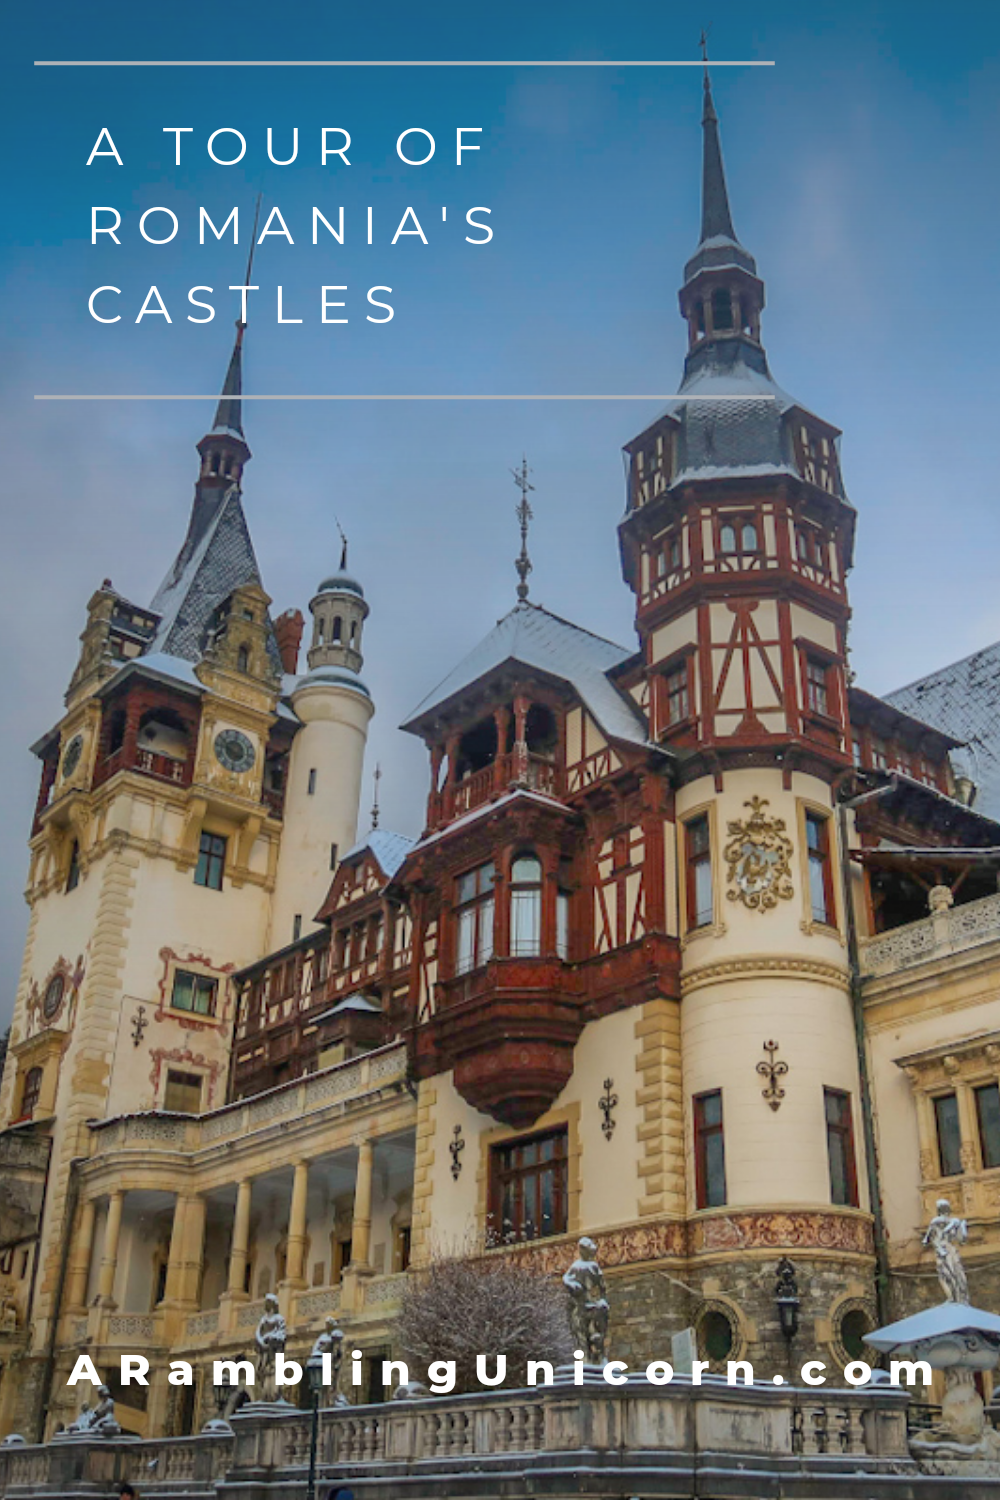 Romania is home to many spectacular castles, including Bran Castle in Transylvania – which has long been associated with Vlad the Impaler (of Bram Stoker’s Dracula fame). Peleș Castle, used as a filming location for A Christmas Prince, is located about an hour’s drive away in the Carpathian Mountains.